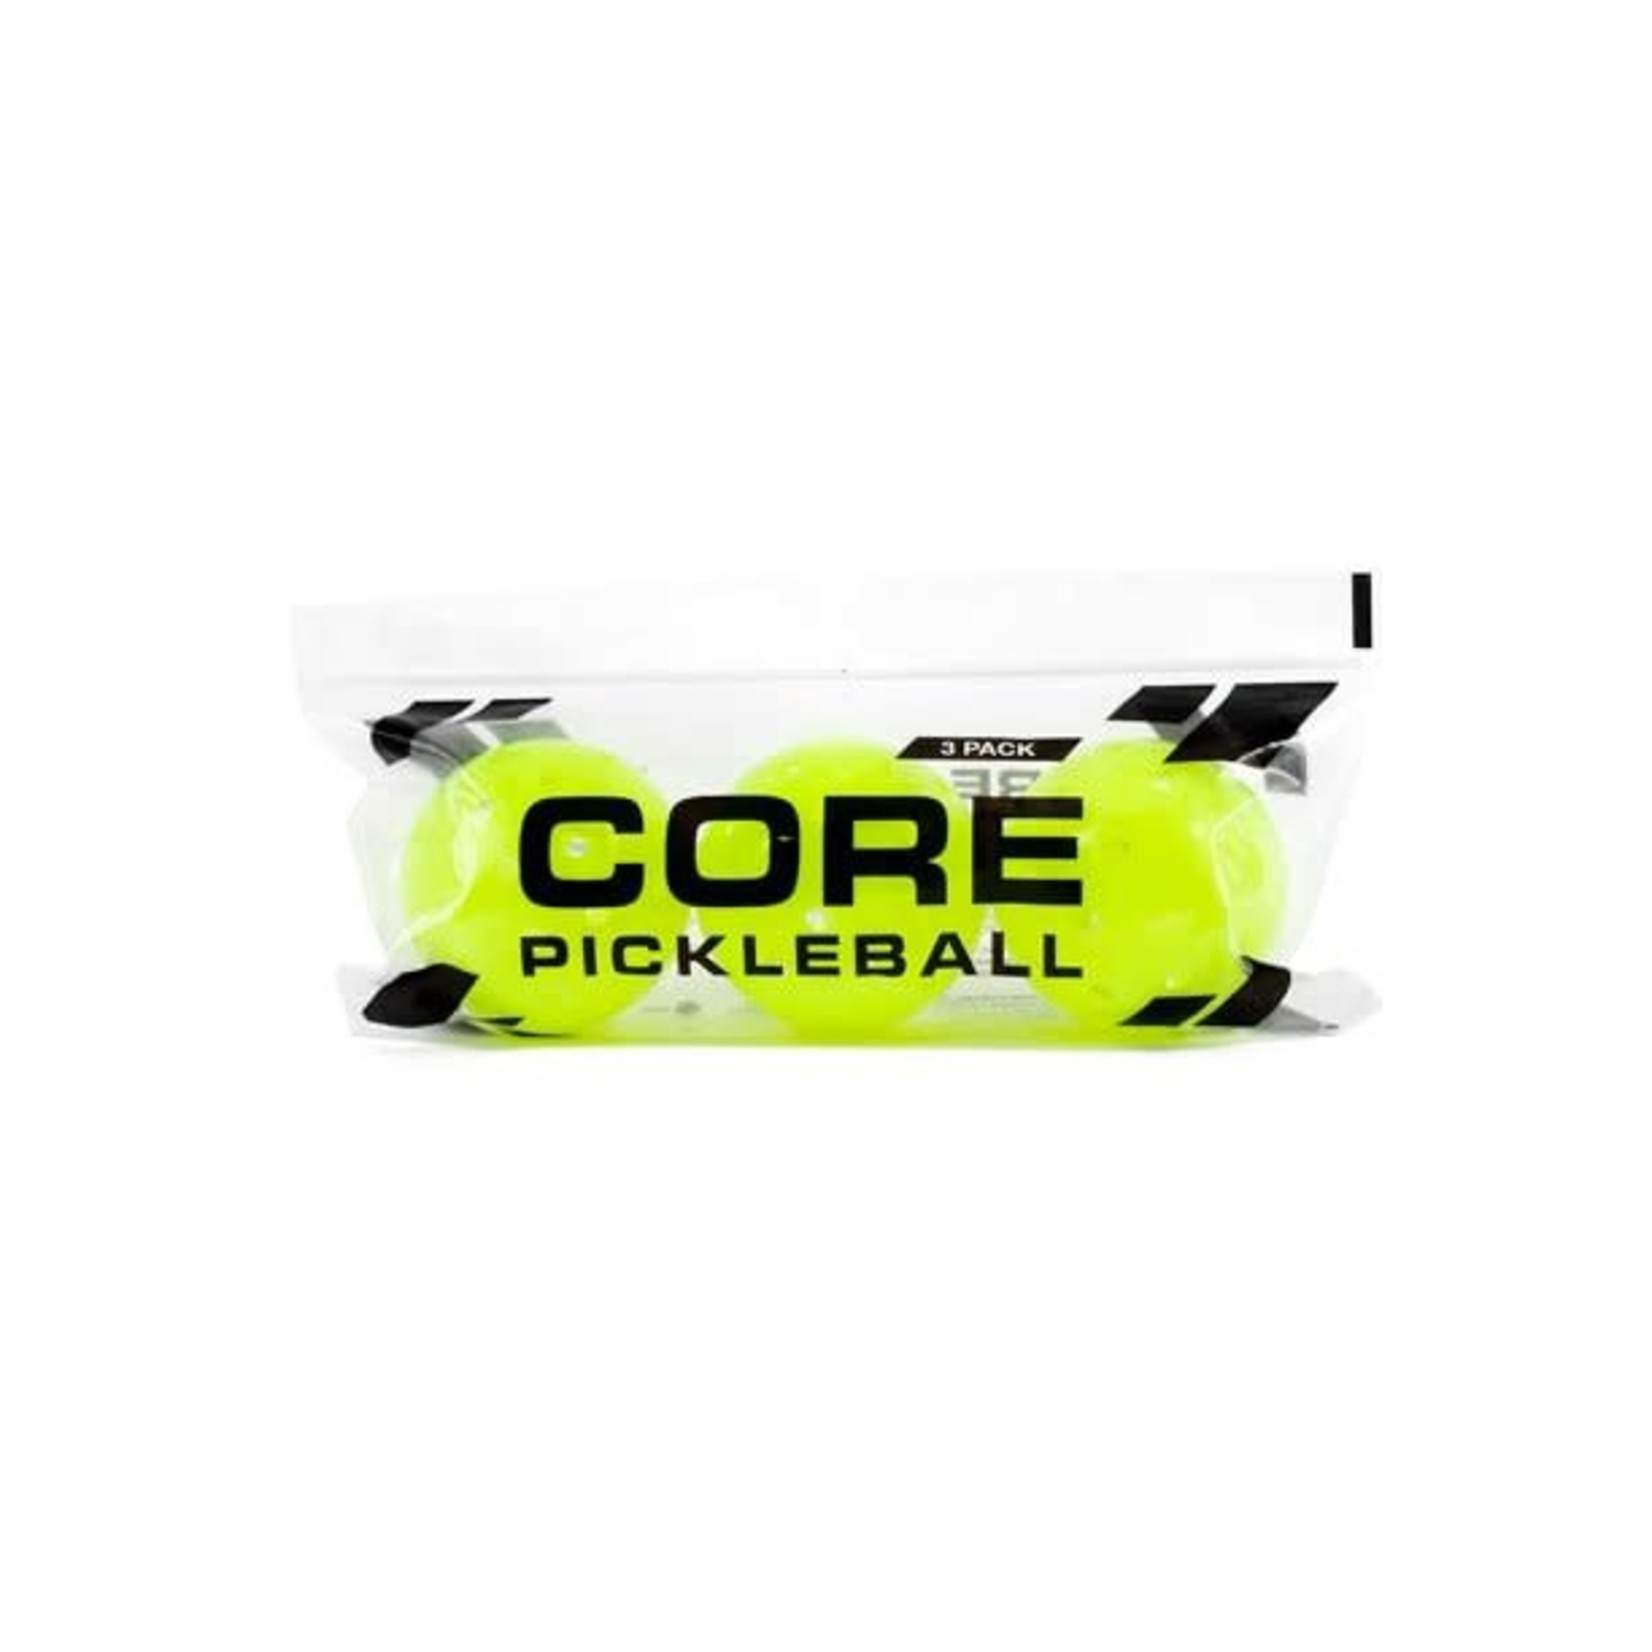 CORE PICKLEBALL 3 PACK - Lime